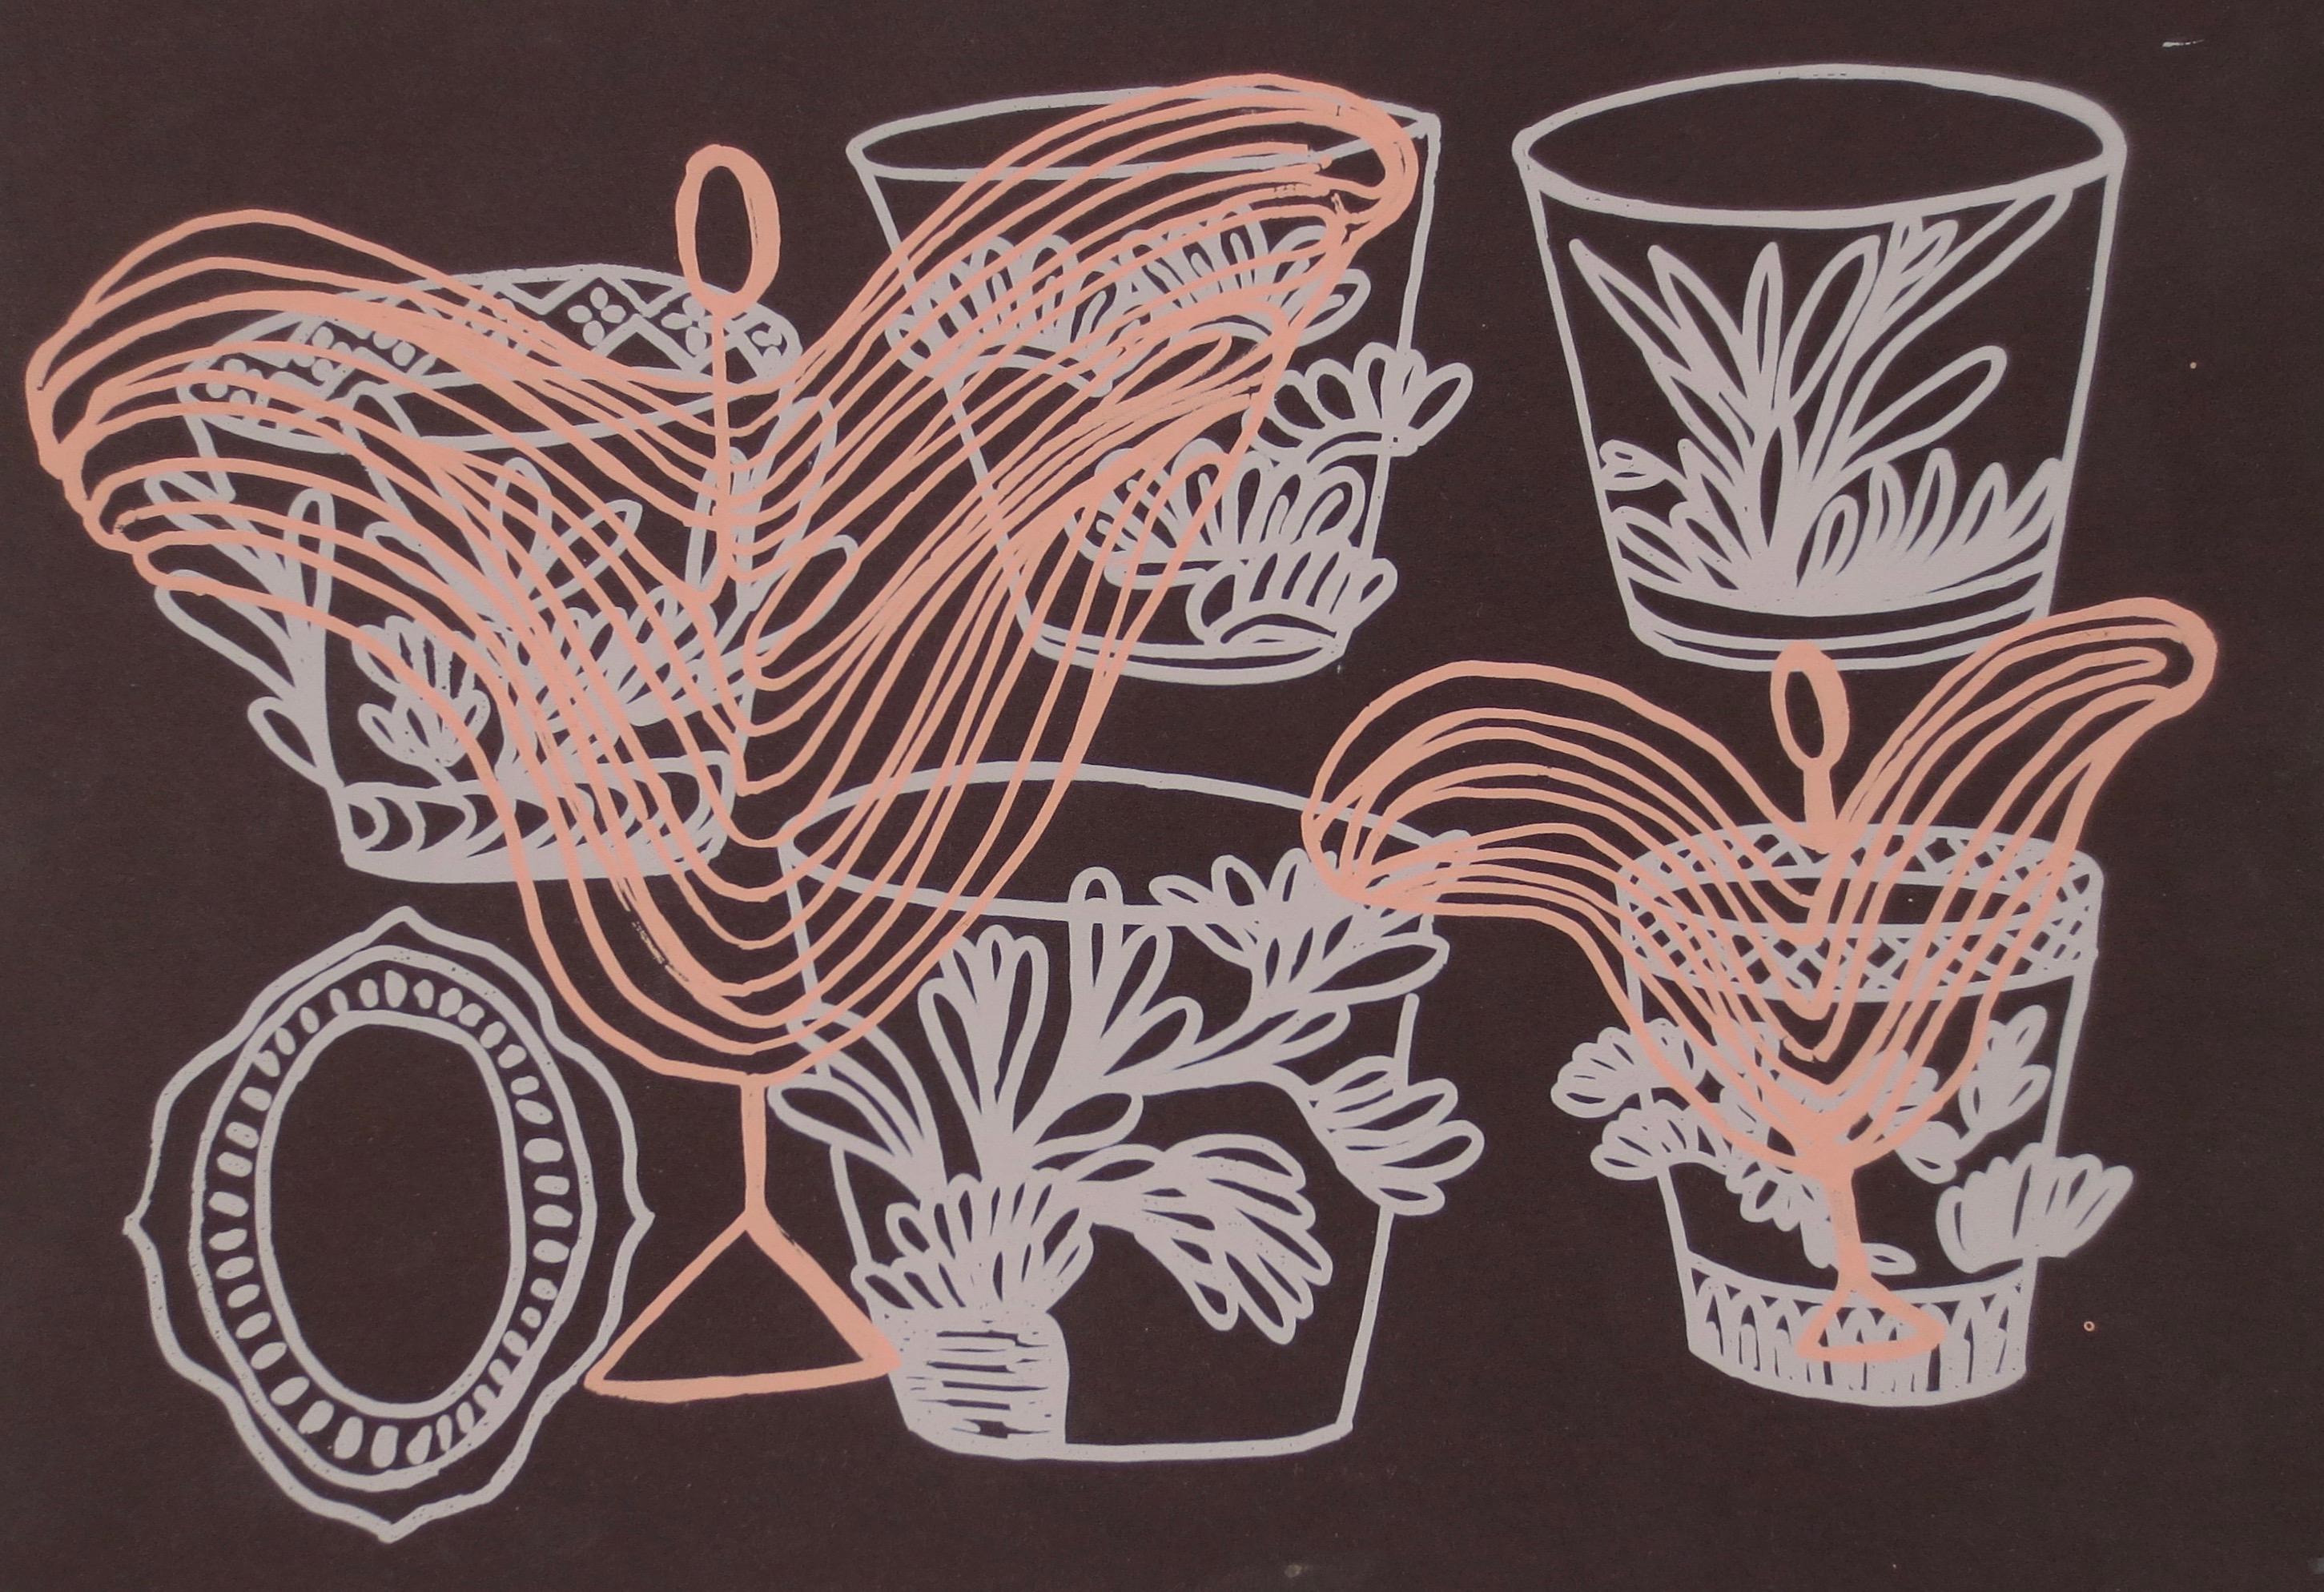 Every Moment, brown and pink print of cups, work on paper